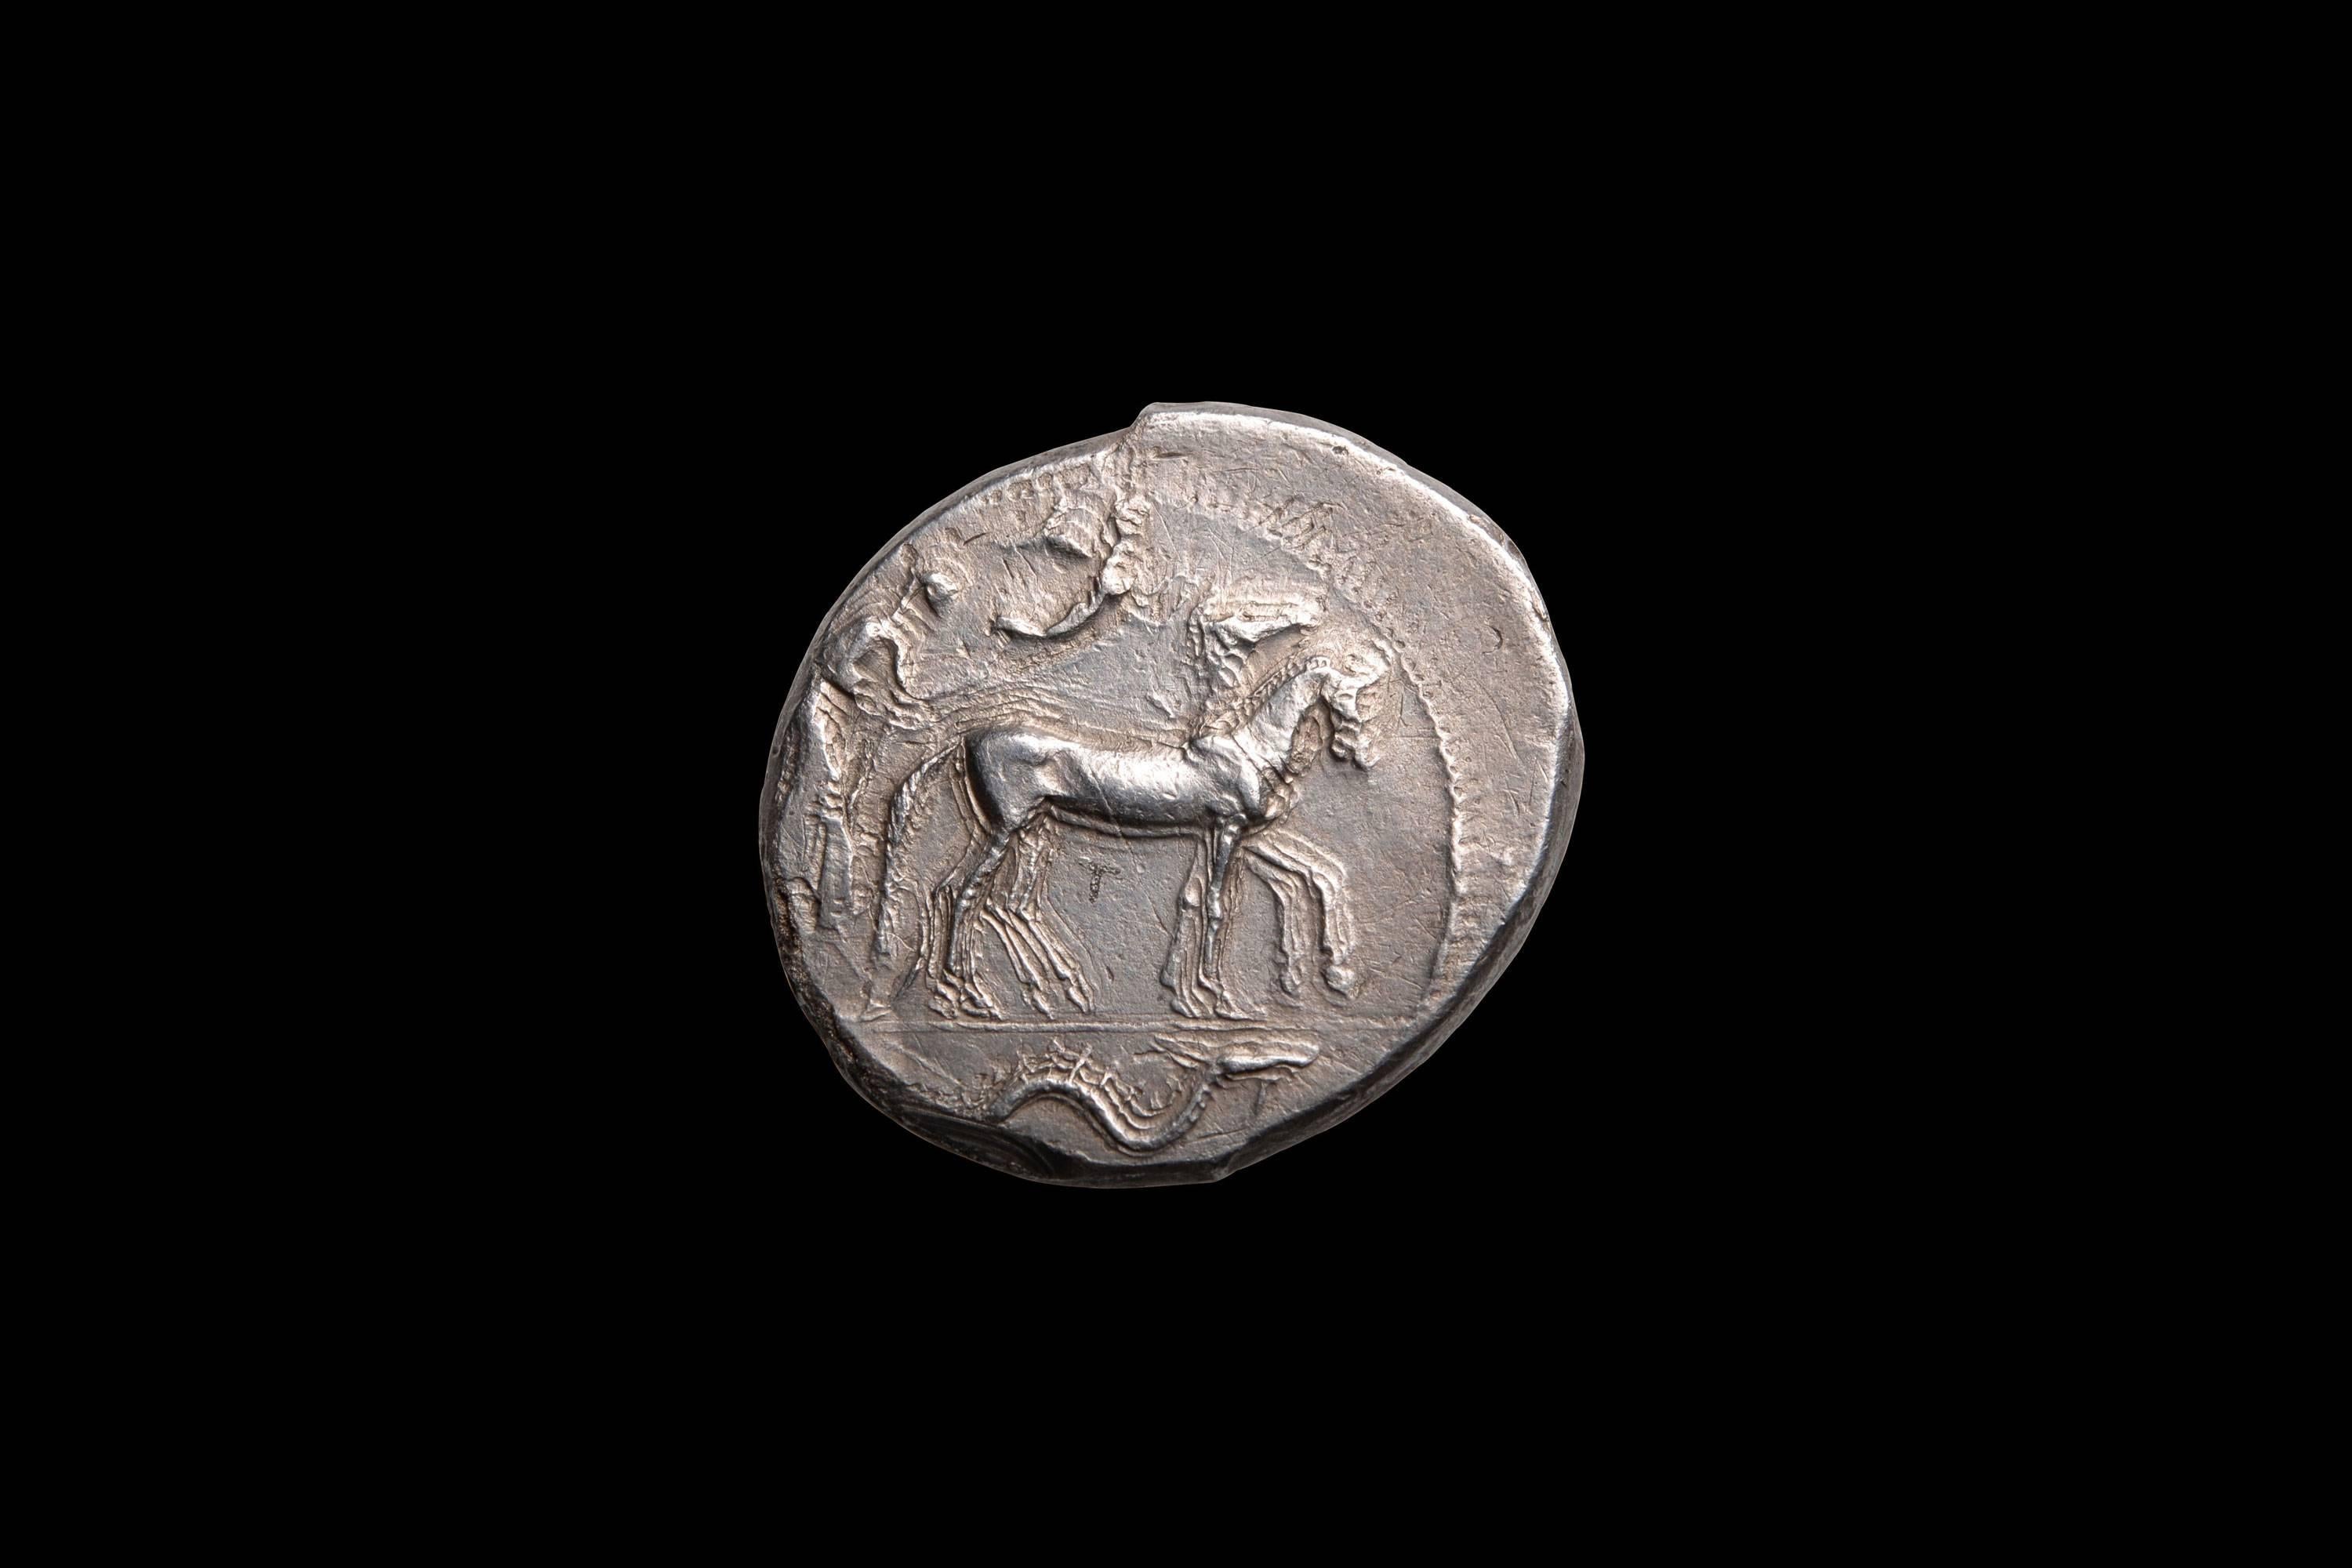 An extraordinarily beautiful and well preserved example of mid 5th Century Syracusan coinage. An ancient silver tetradrachm, from the great city of Syracuse, struck circa 450 BC.  An exceptional example of early Classical, transitional style